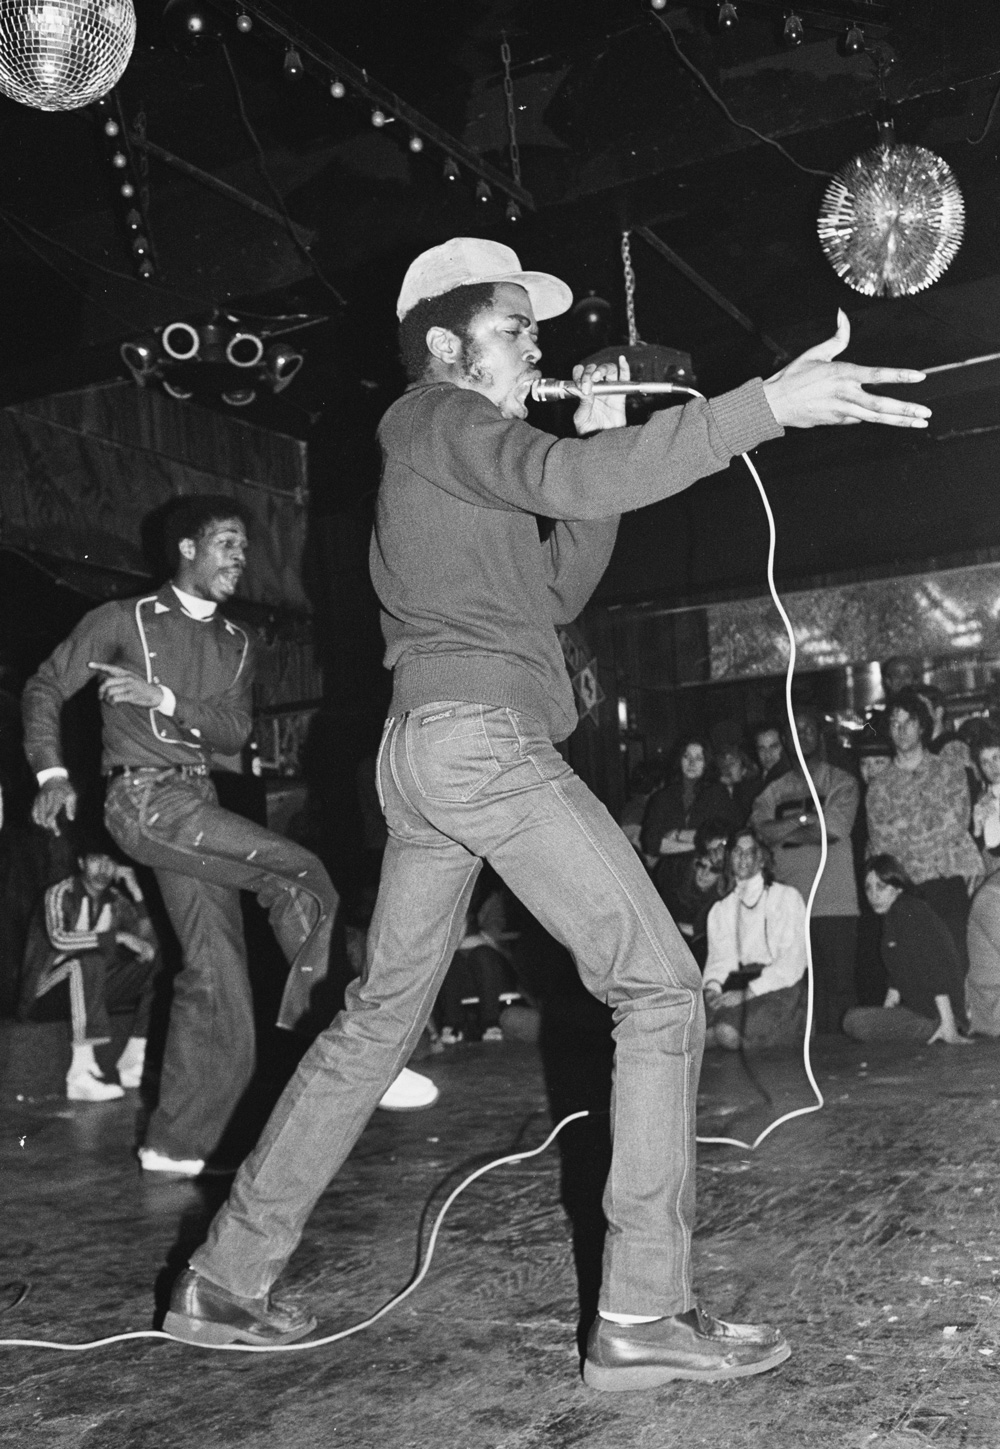 Joe Conzo, JDL (Jerry D. Lewis) of Cold Crush Brothers at Club Negril, 1981. Photo print. Courtesy of the Joe Conzo Archives. 